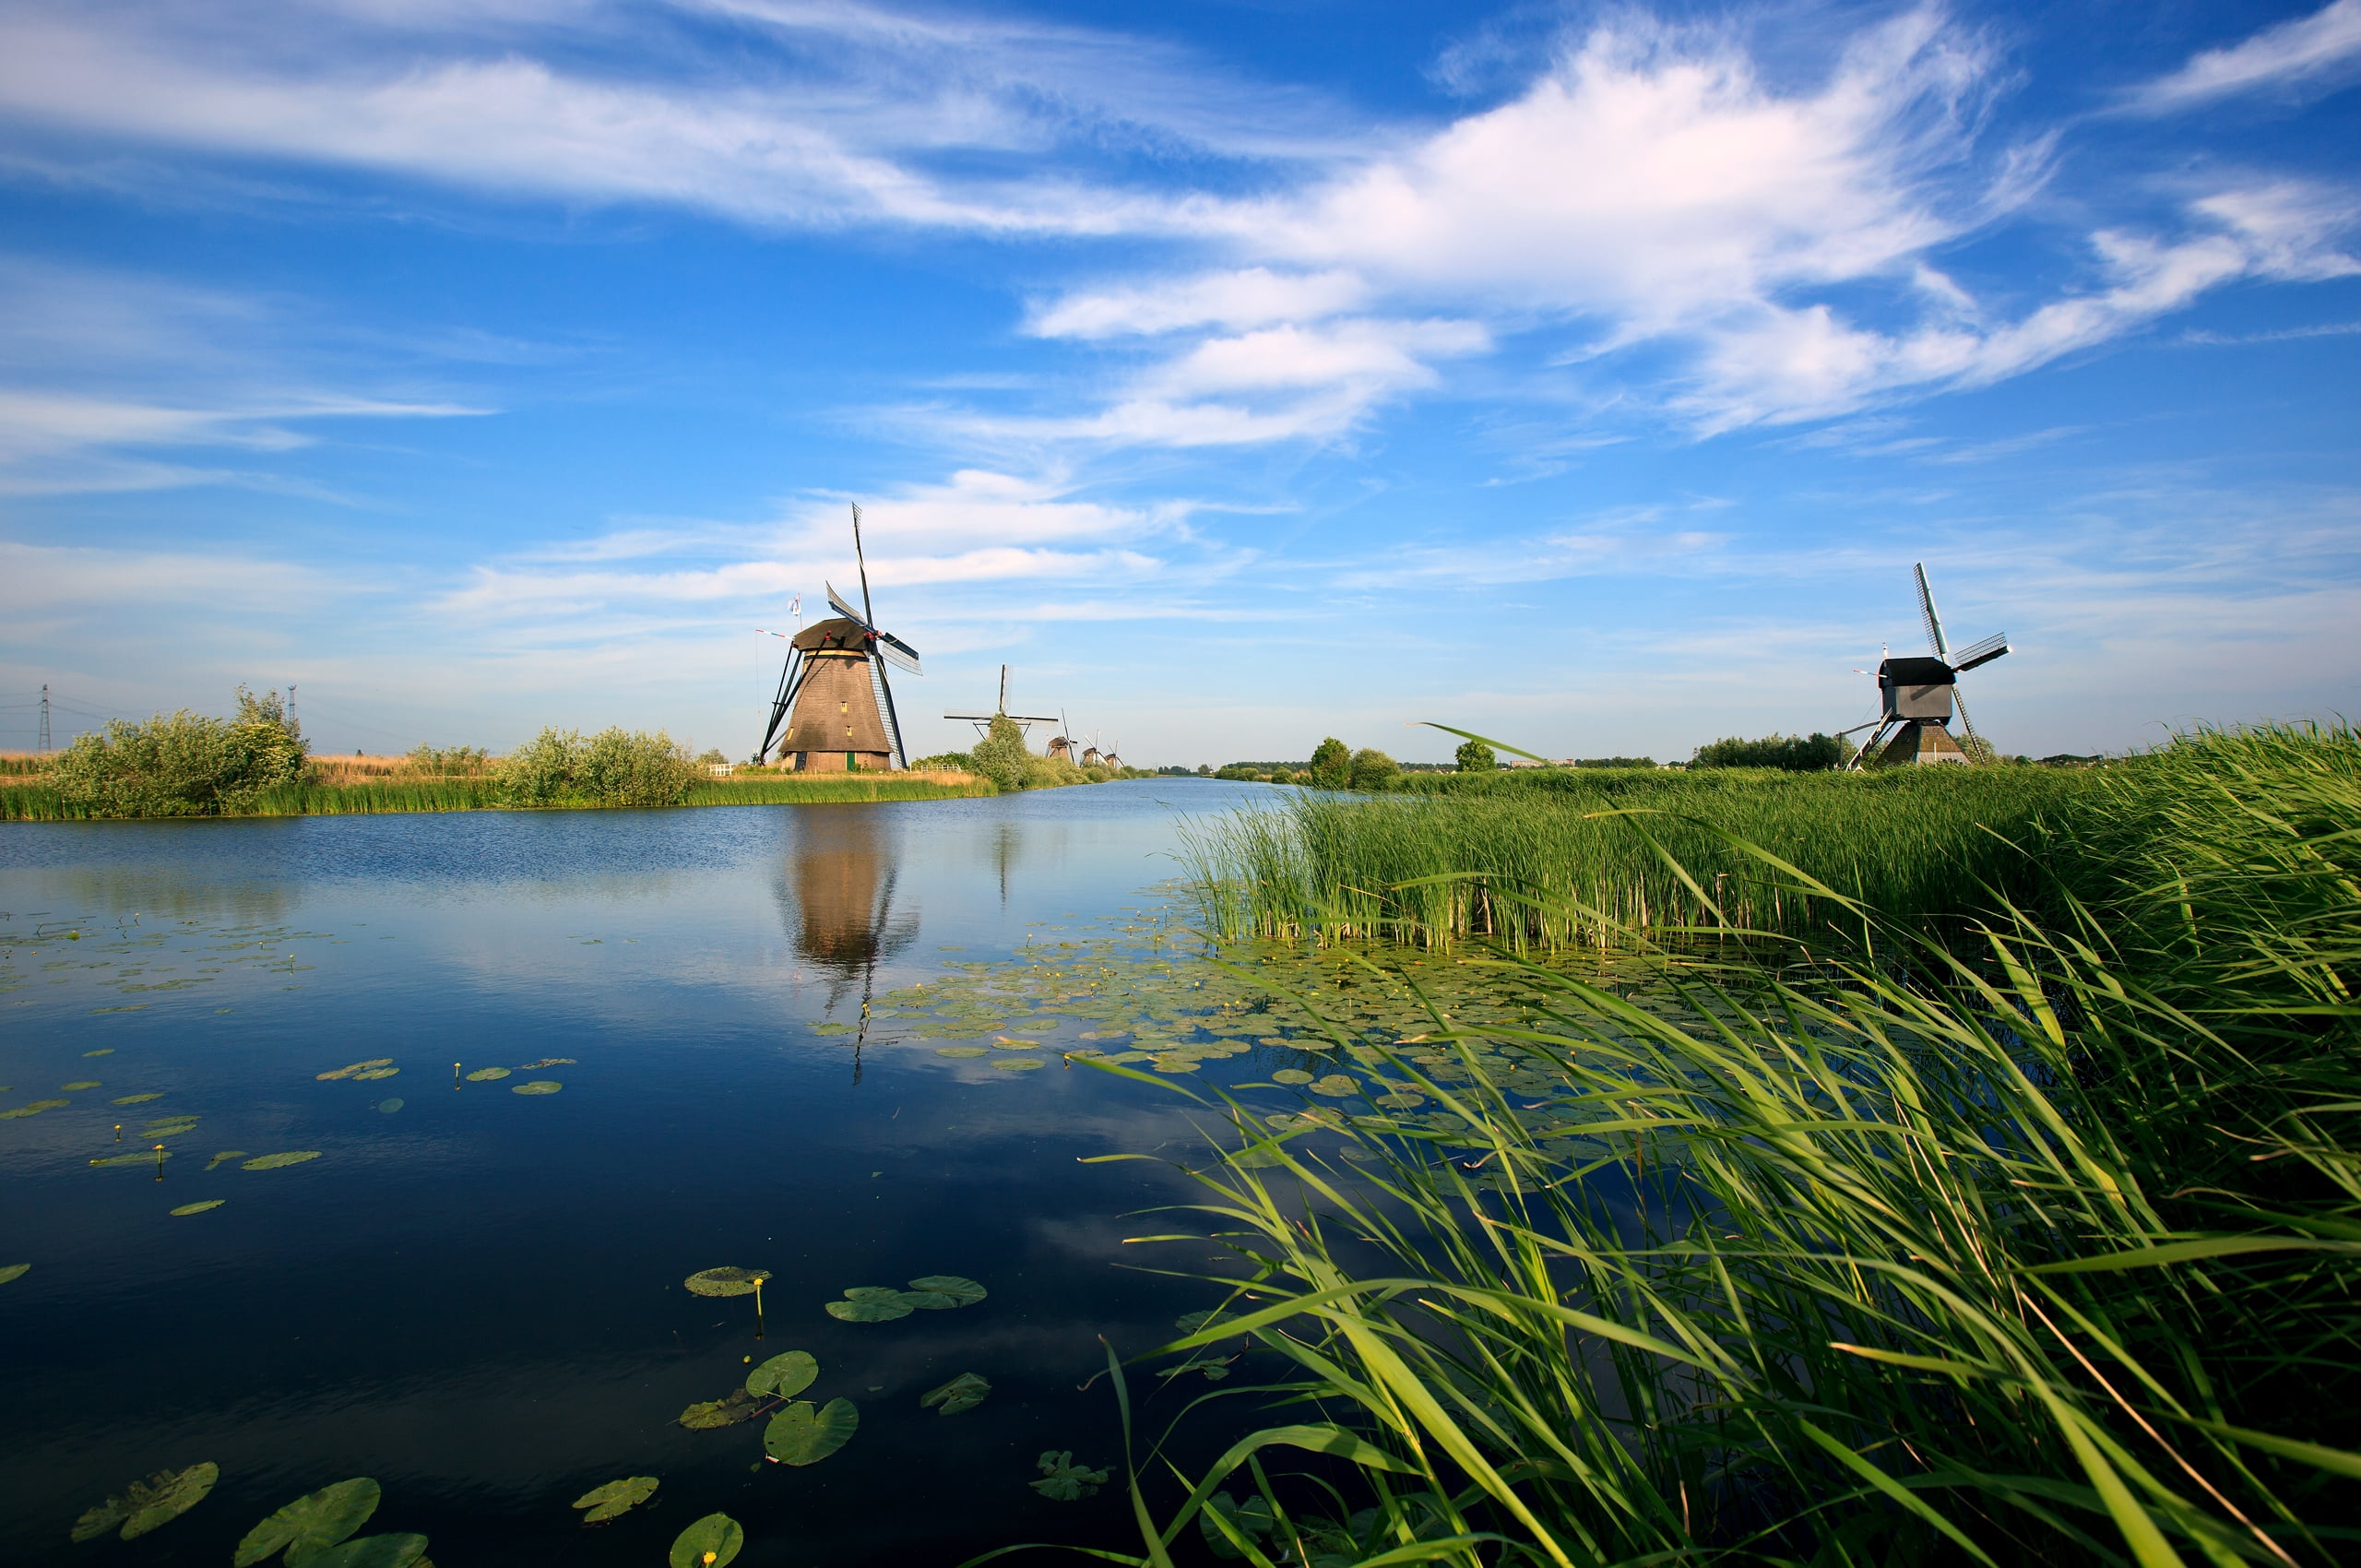 brown watermill surrounded with lake and green grass under blue and white cloudy sky